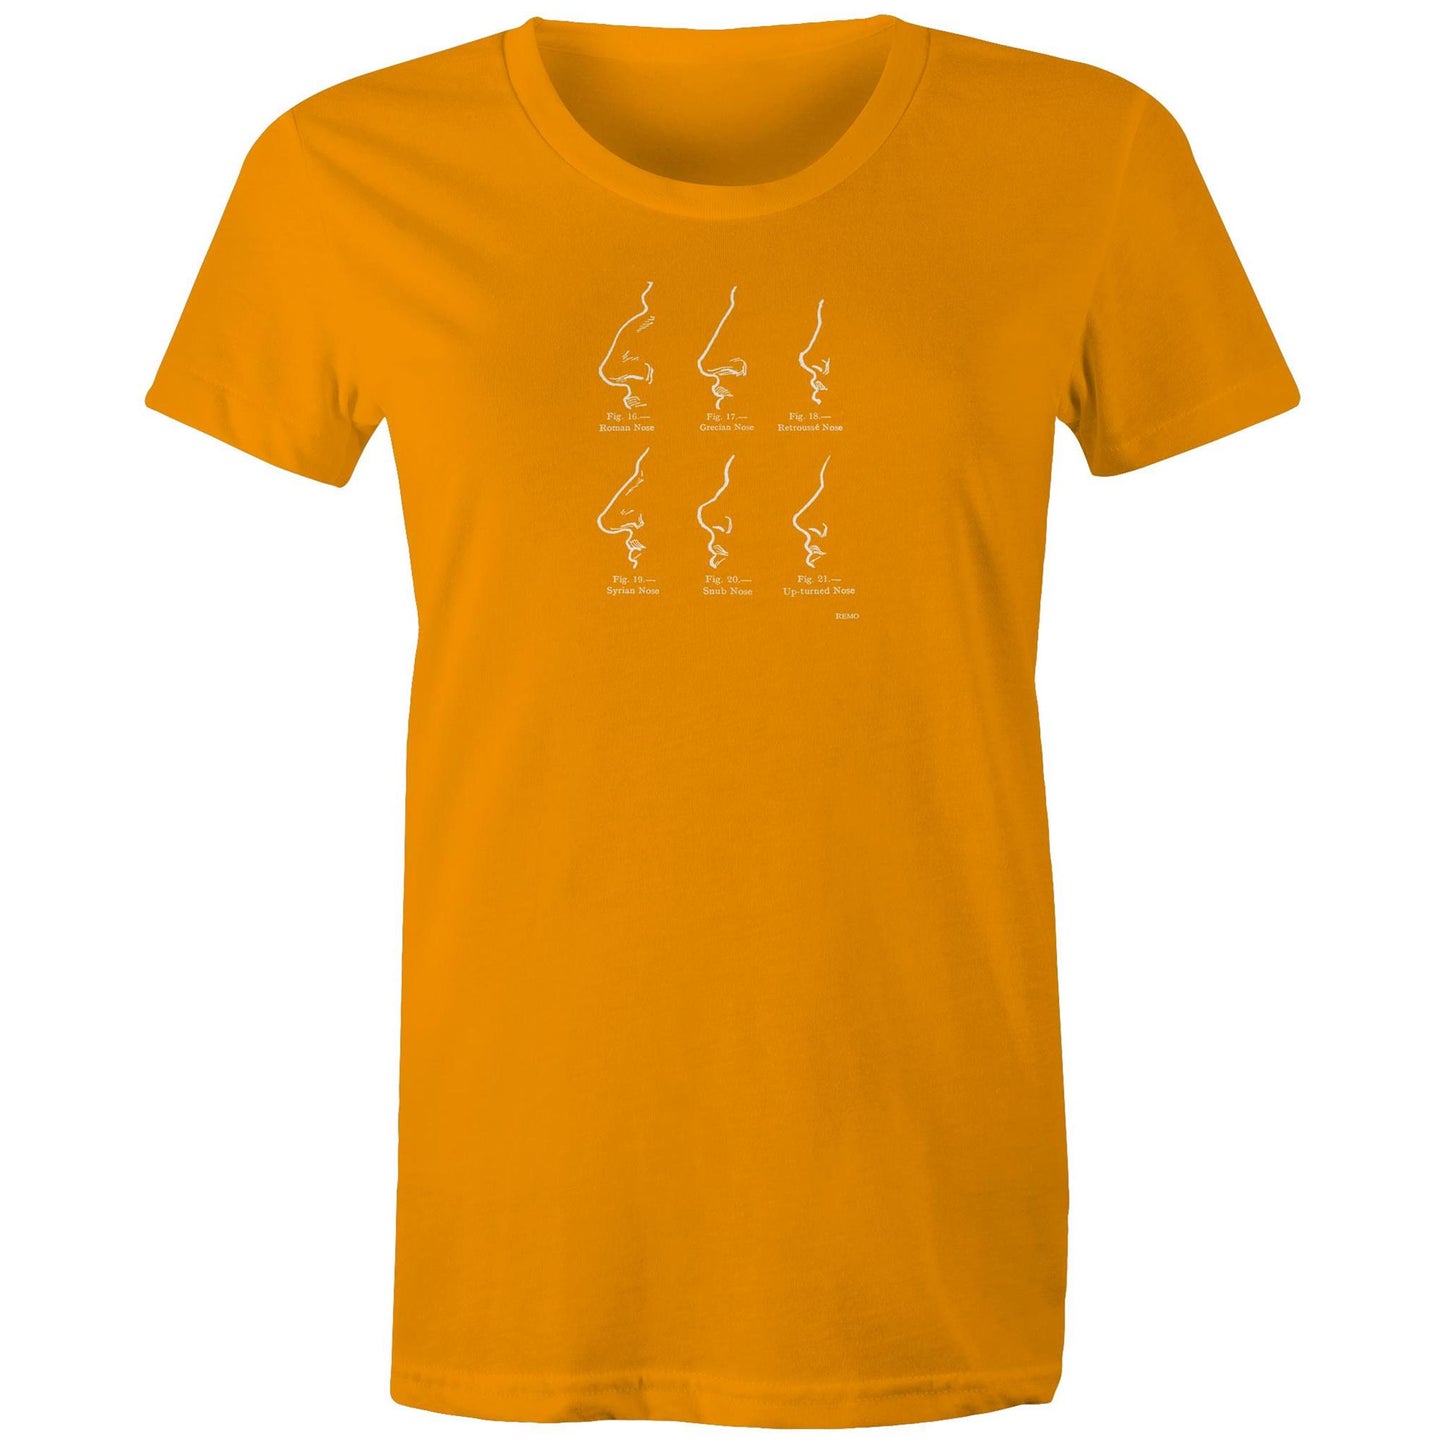 Noses T Shirts for Women